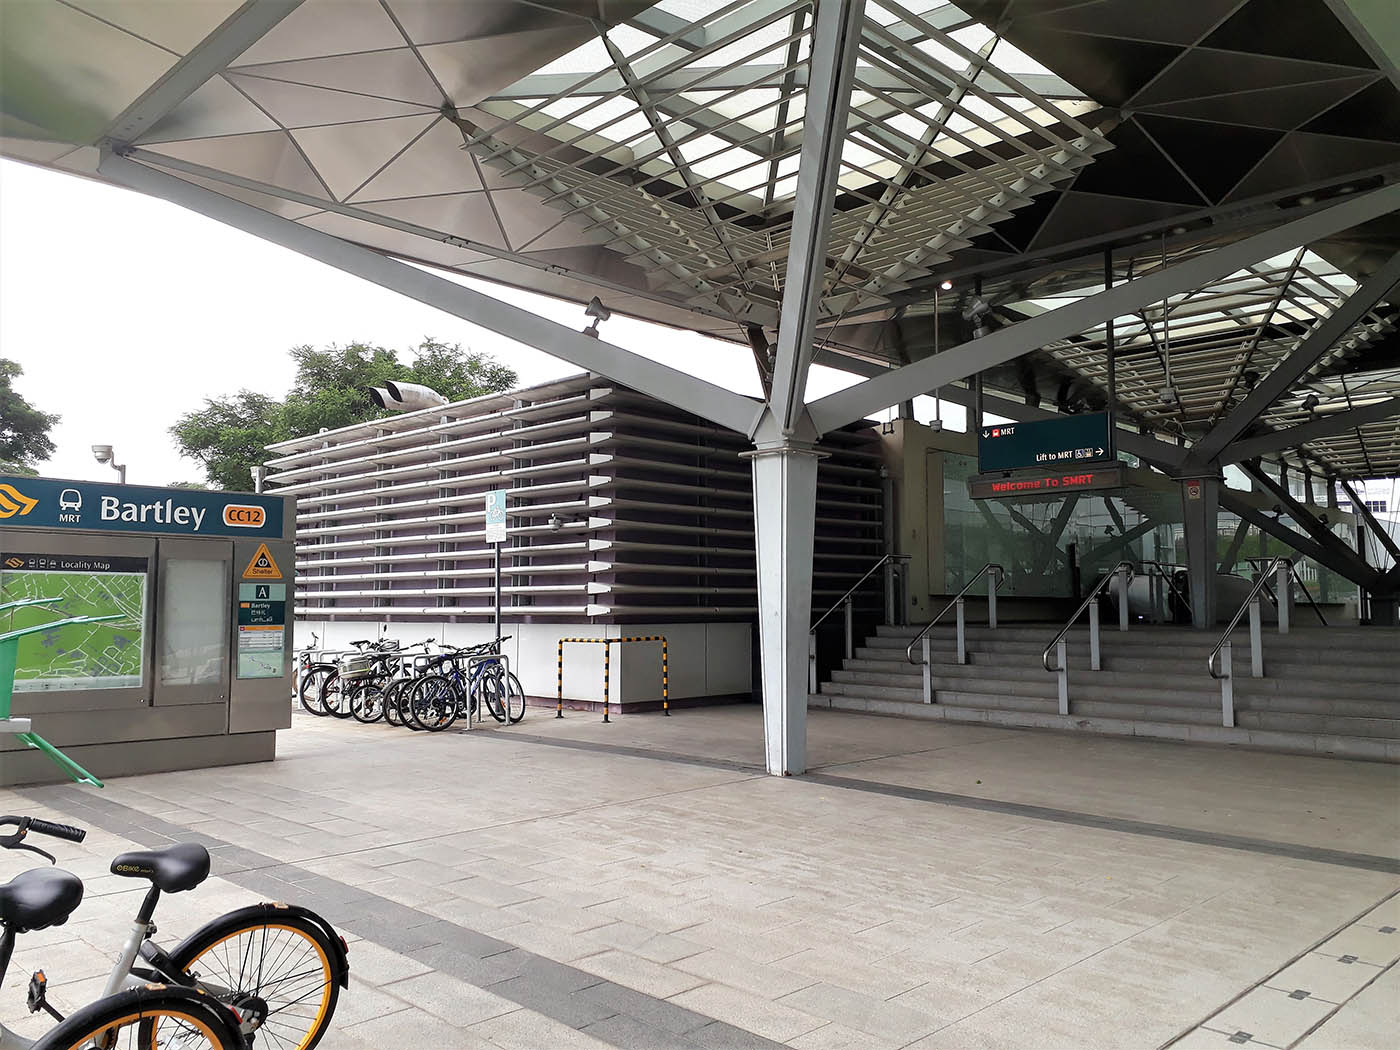 Bartley MRT Station - - Exit A